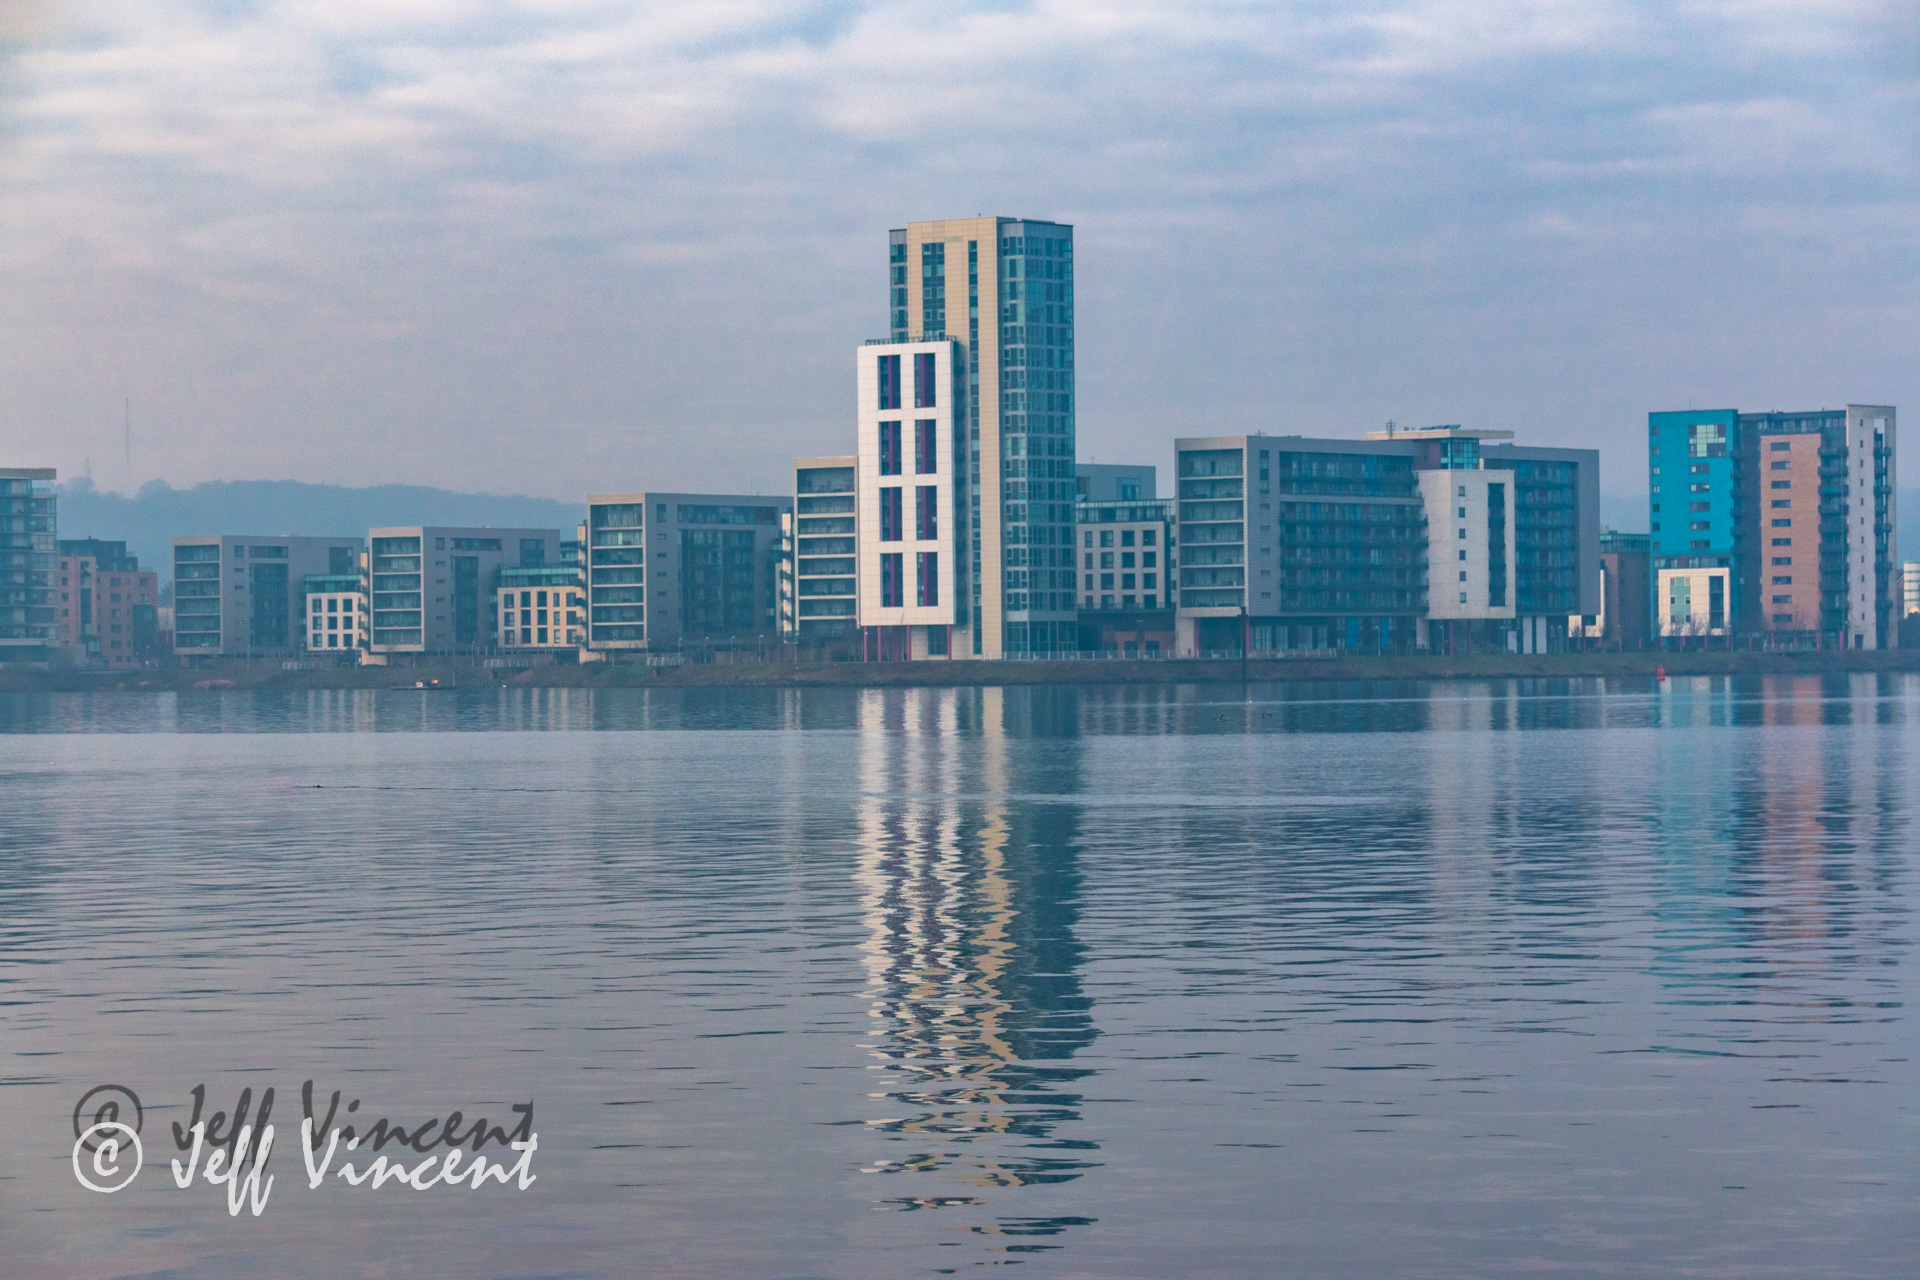 View Across Cardiff Bay - with Lightroom Adjustments